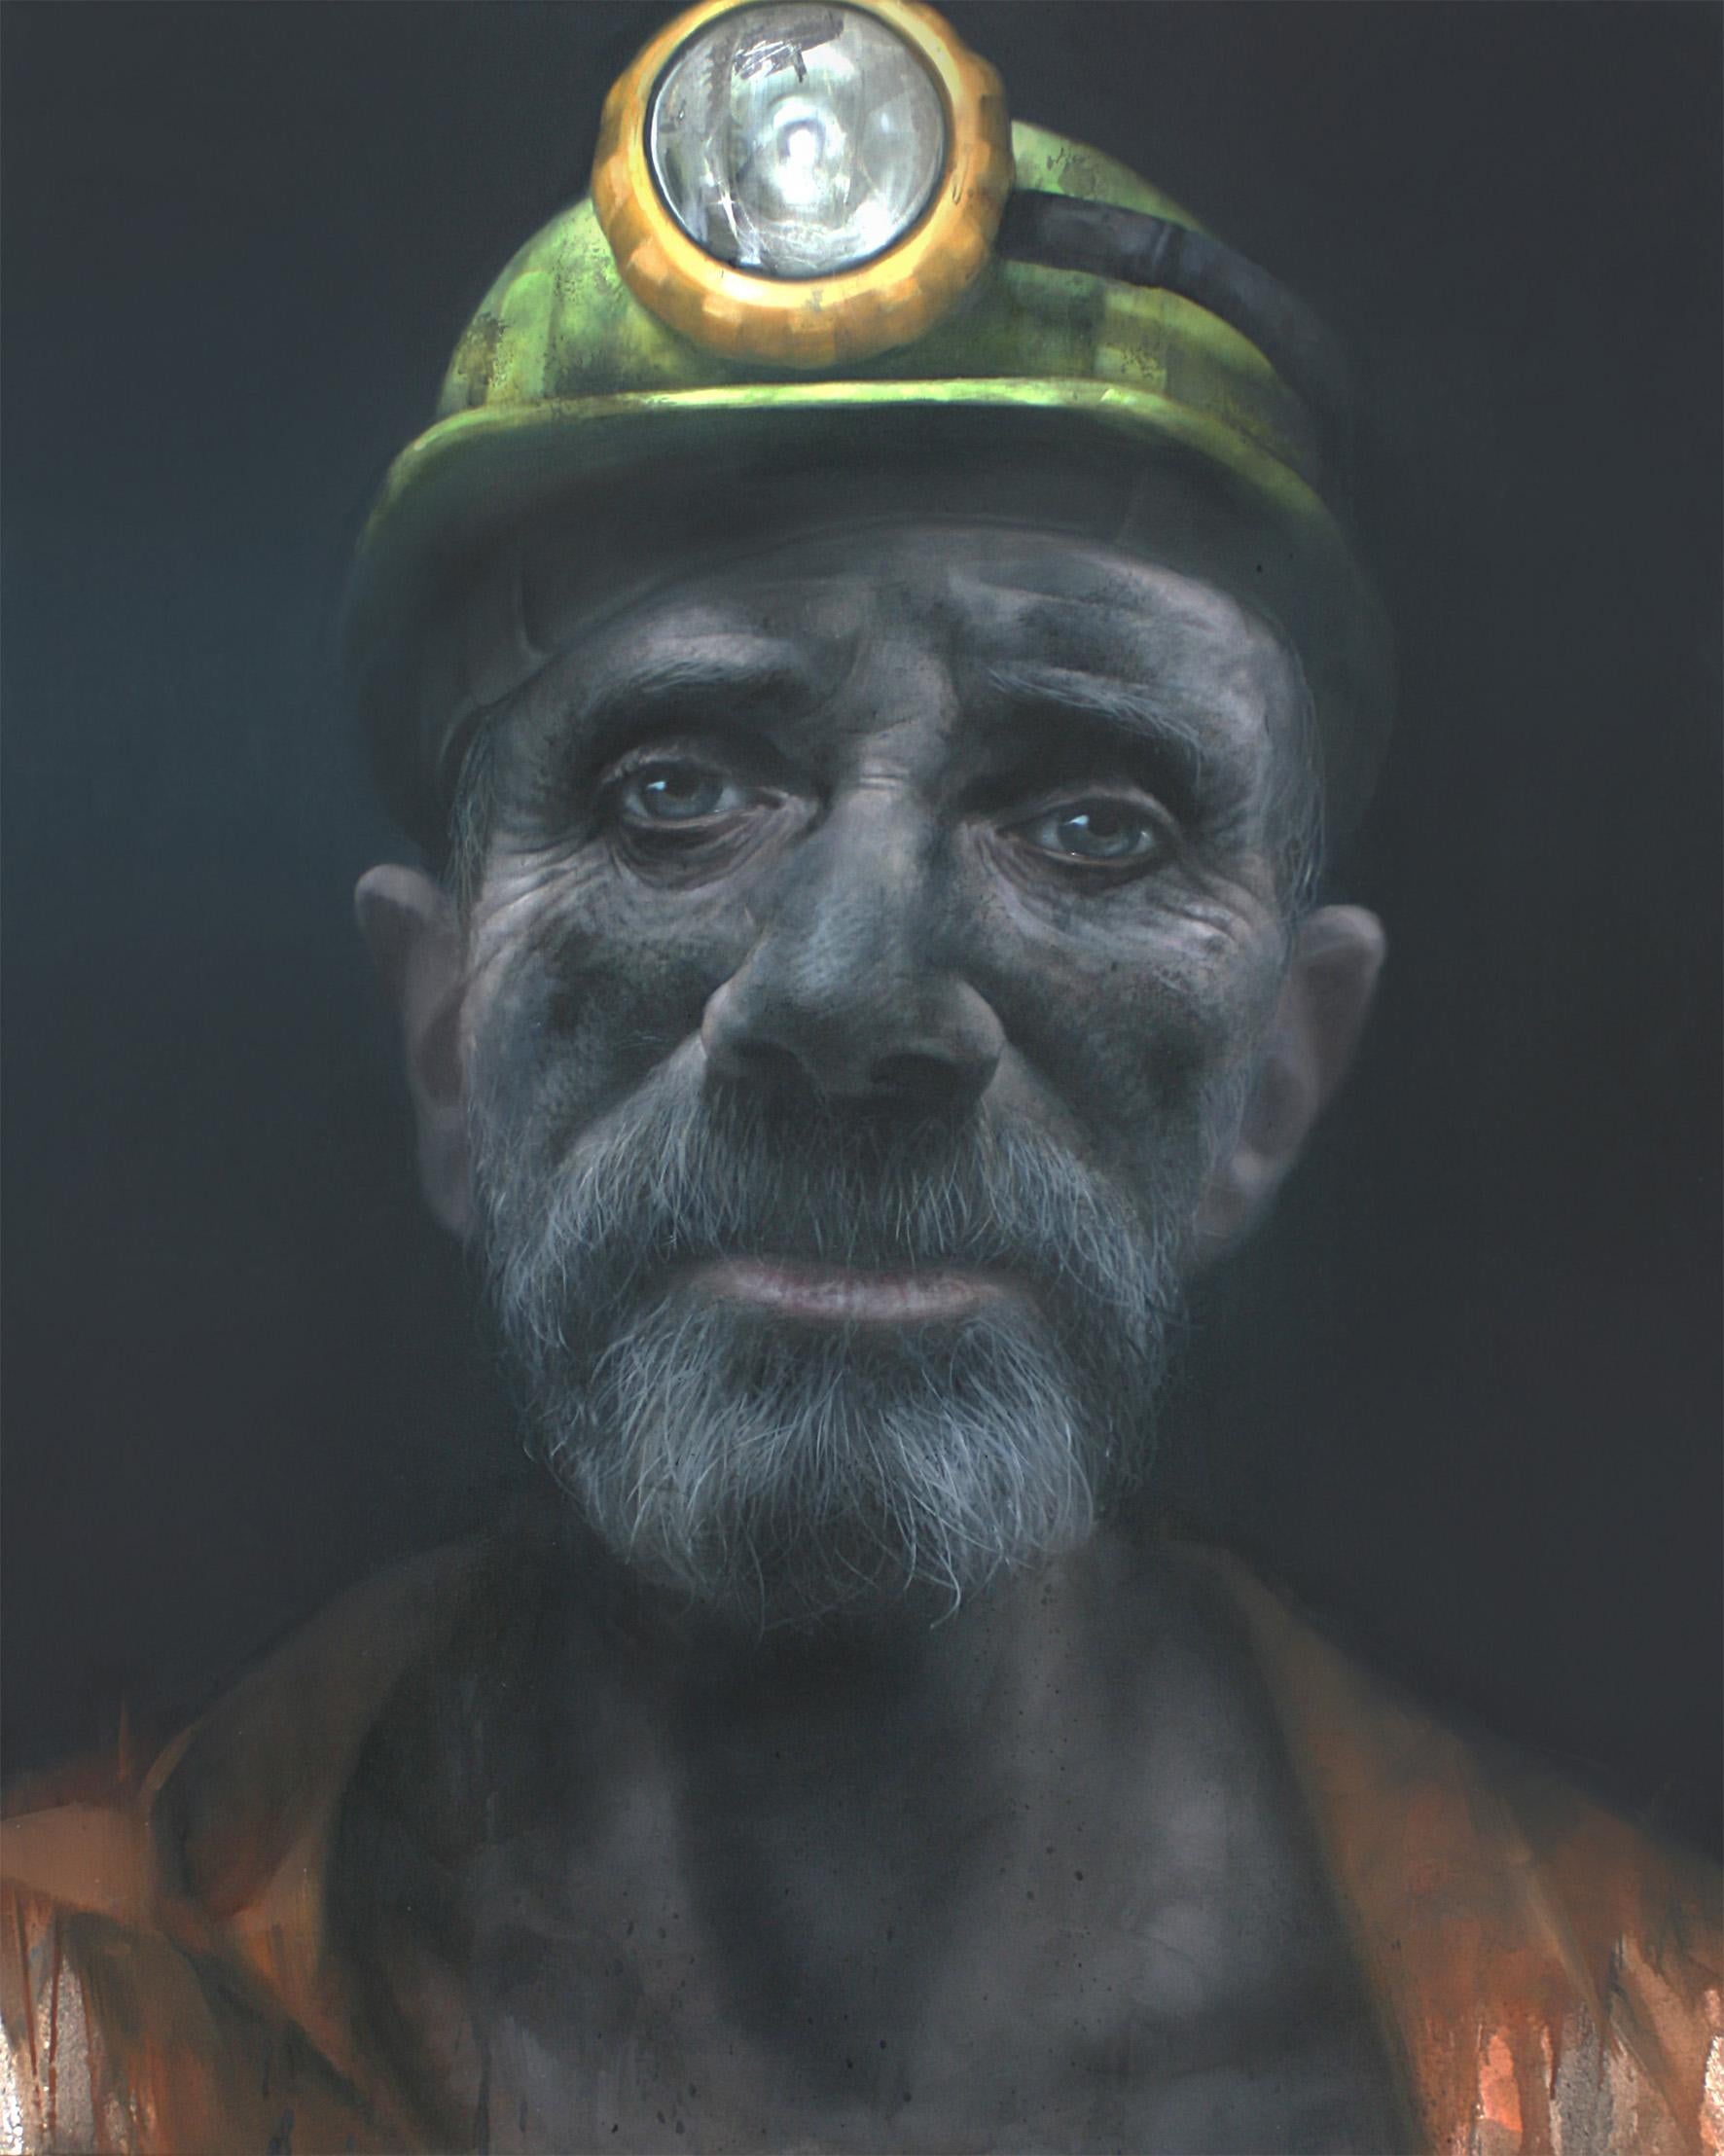 Andrew Hunt's Thurcroft 91 is a 21st Century oil on canvas painting in a figurative realist style depicting a headshot of a man after a day of work with his head torch and helmet on. Hunt’s blend of painterly realism with his understanding of human